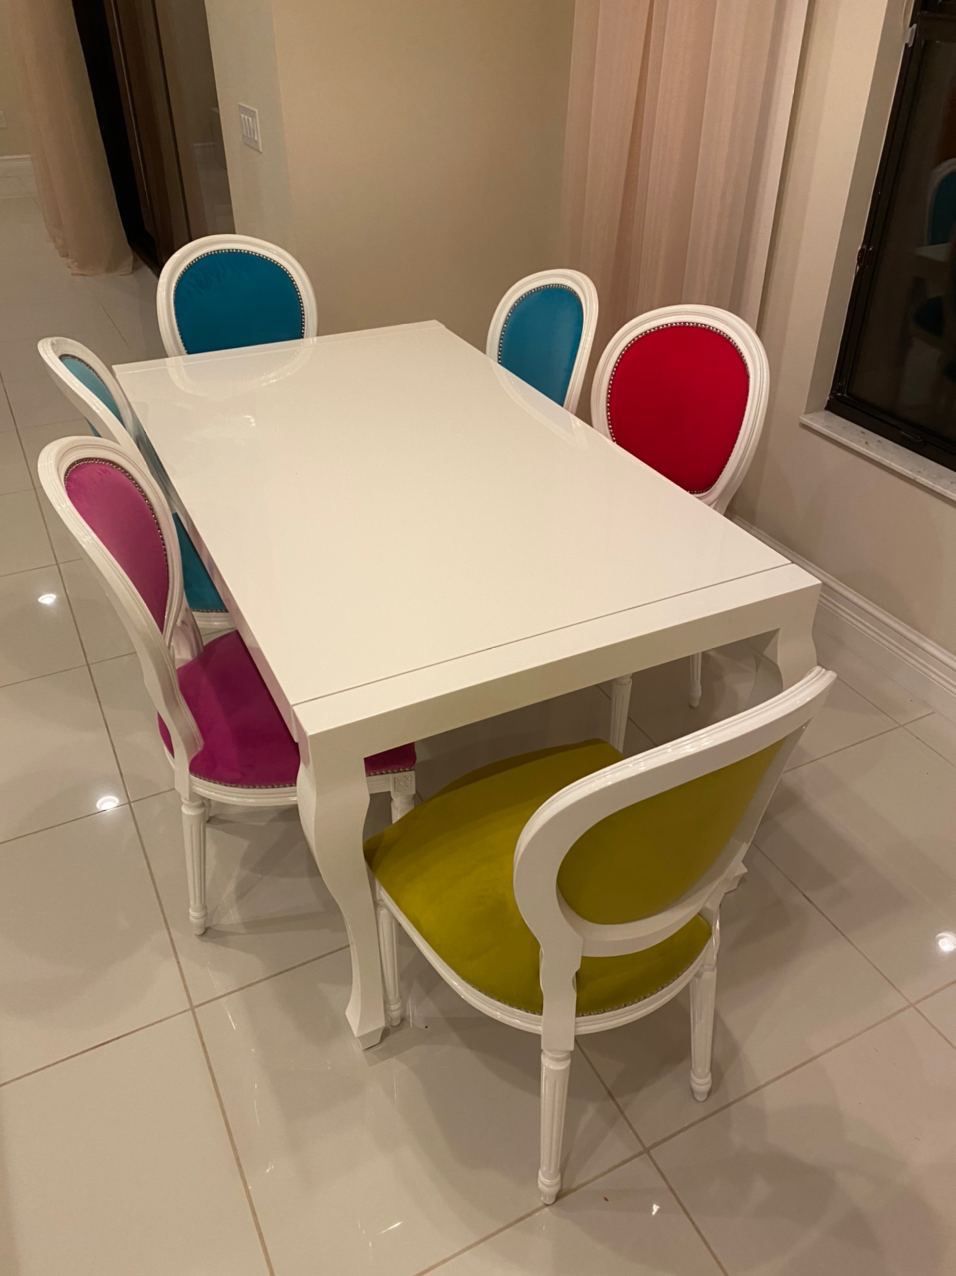 Kitchen table with chairs and bar stools